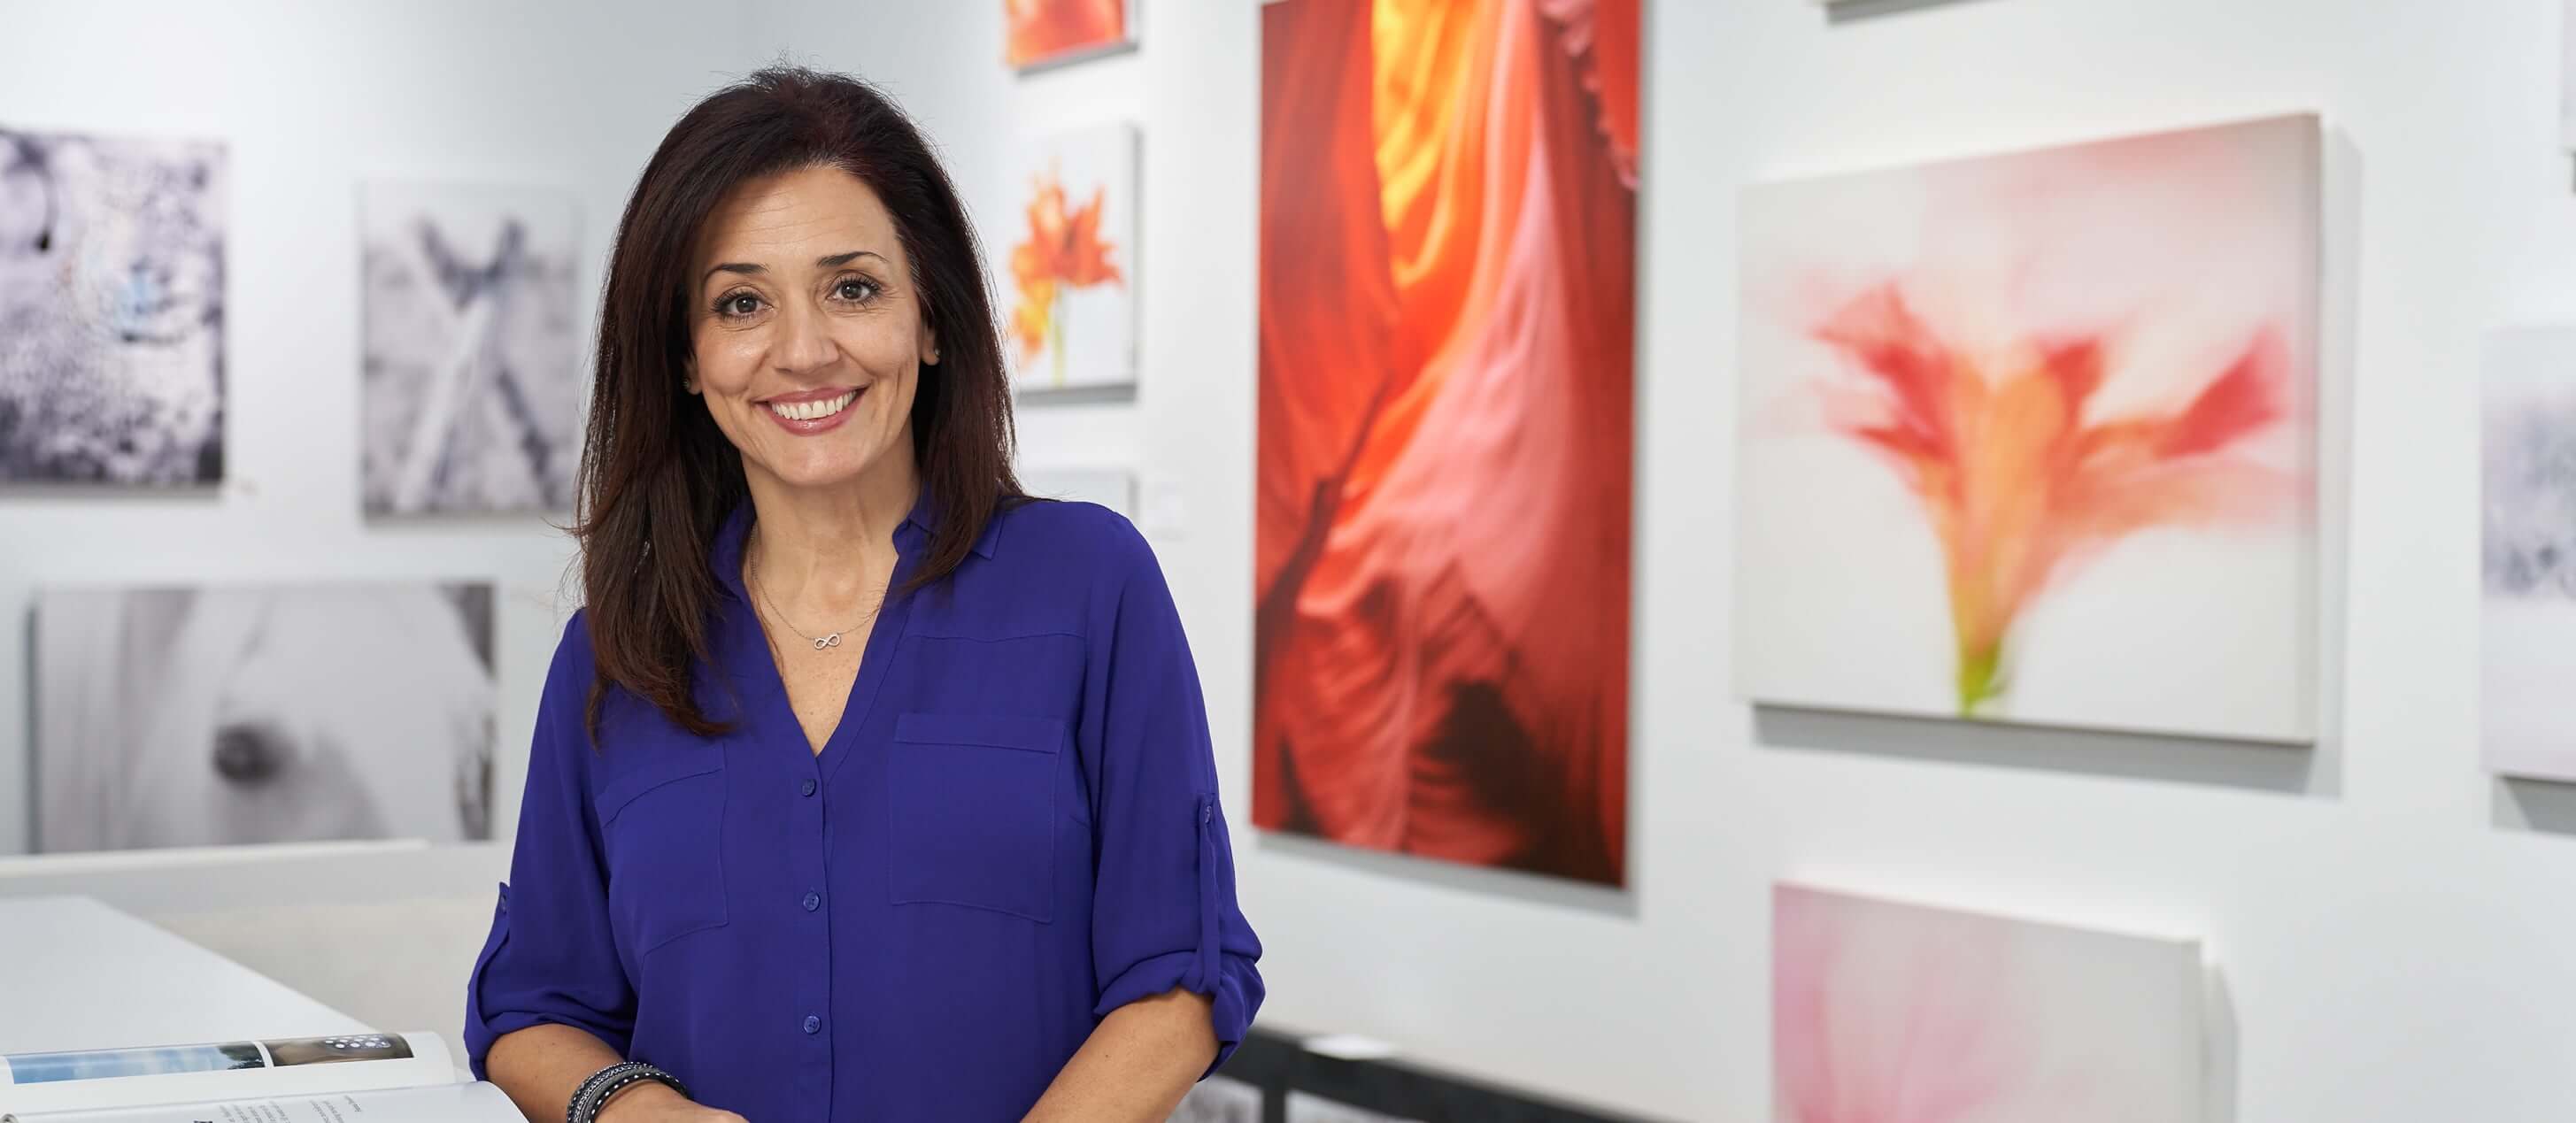 Image of a smiling woman in a gallery